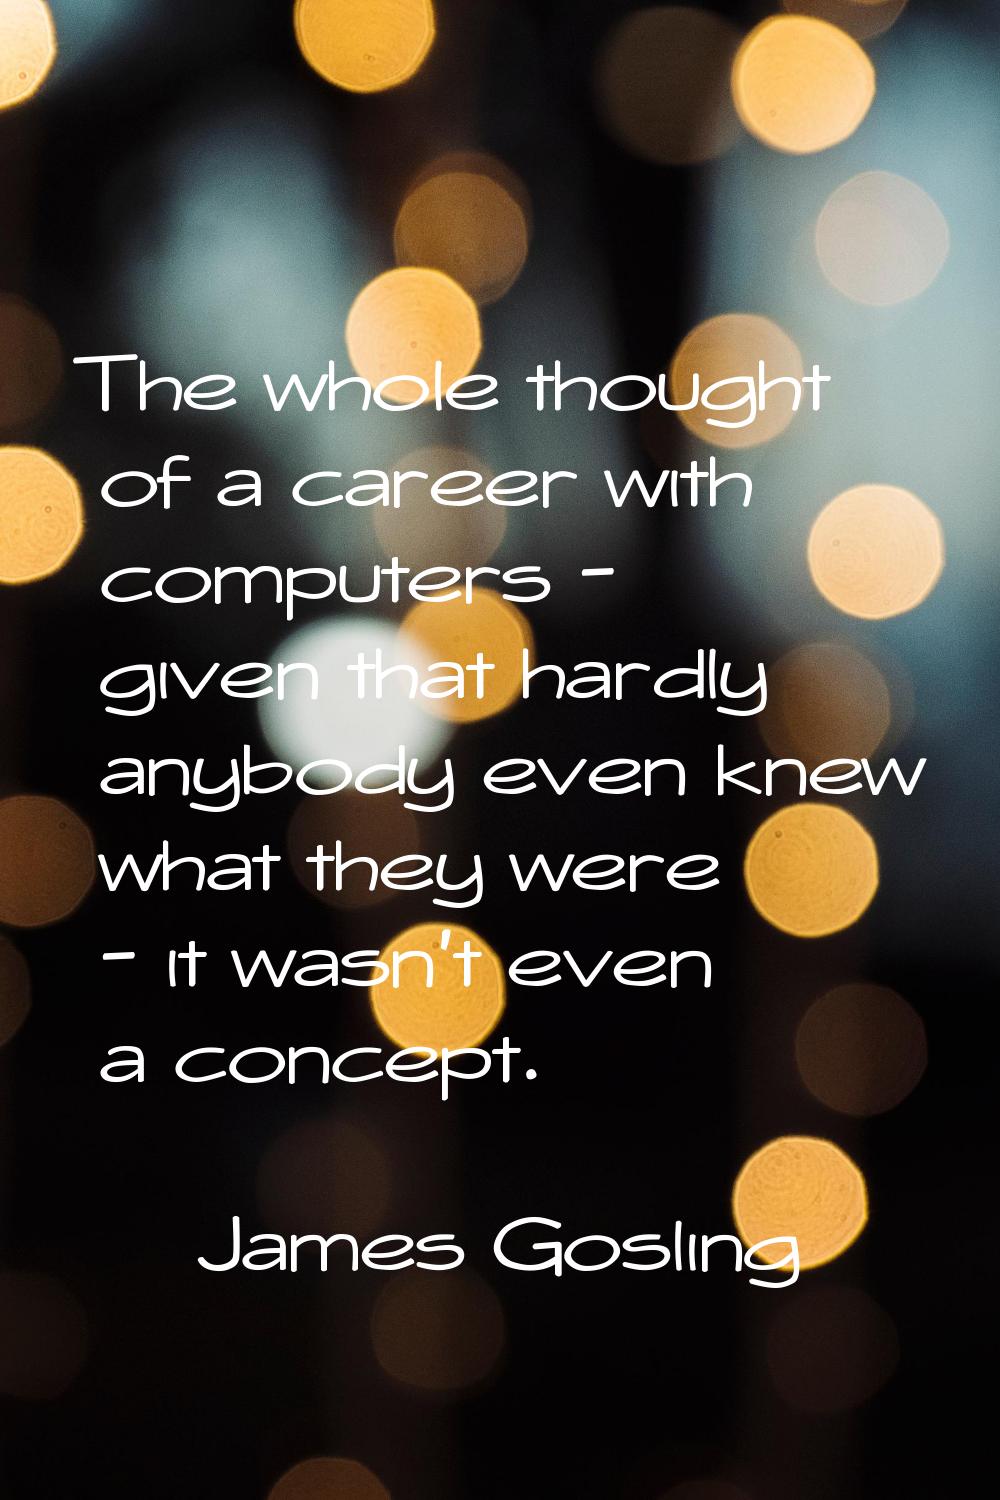 The whole thought of a career with computers - given that hardly anybody even knew what they were -